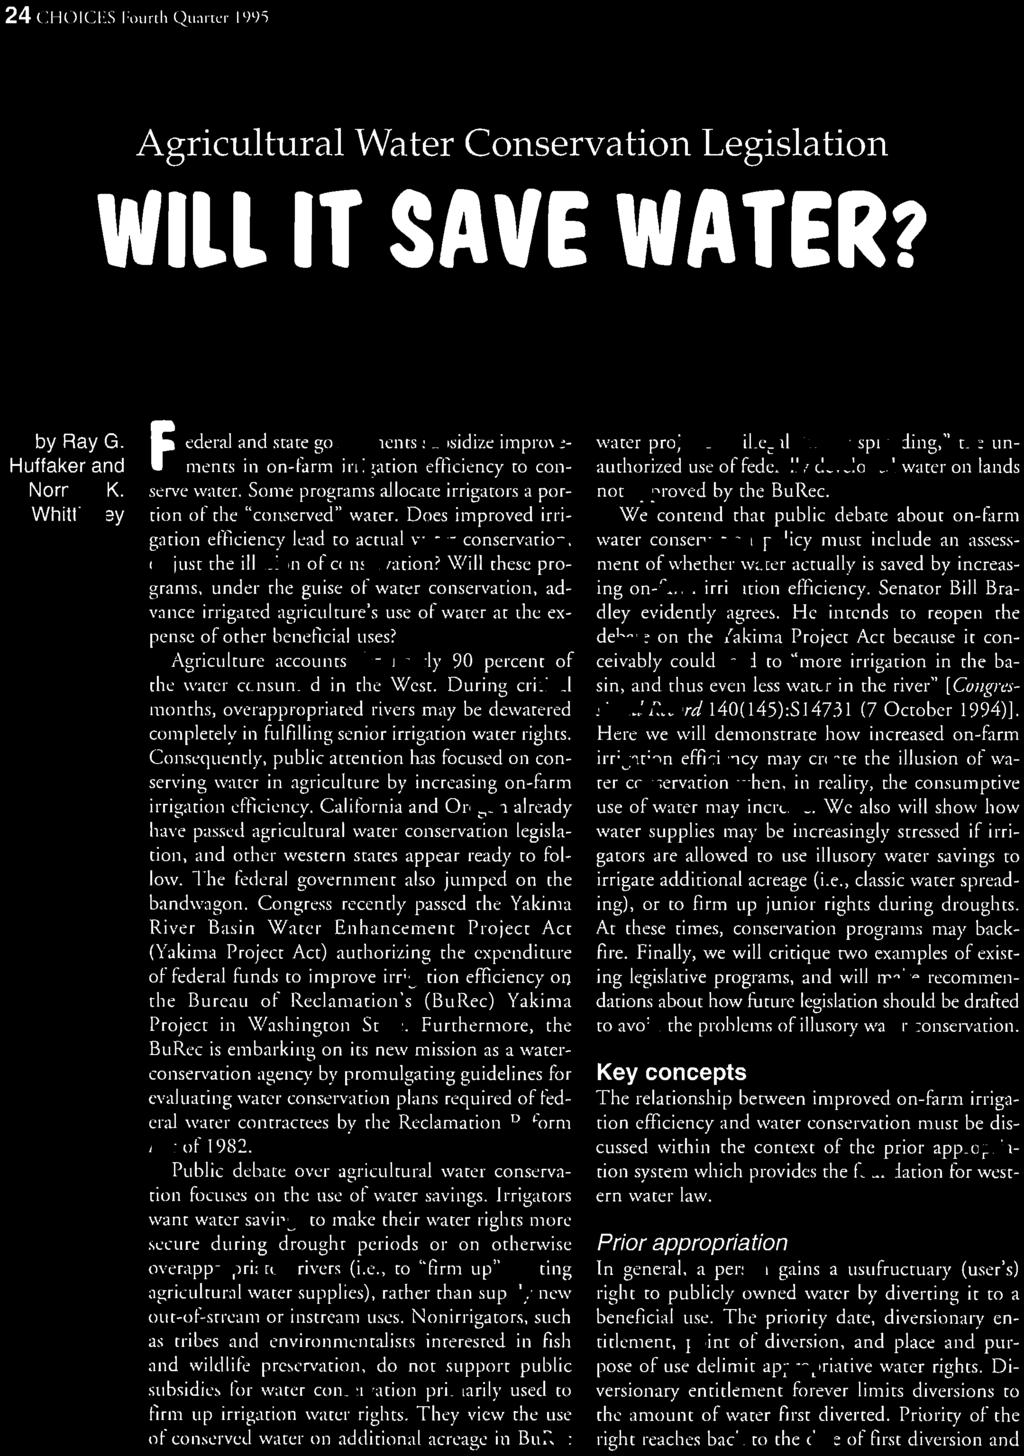 Reclamation Reform Act of 1982. Public debate over agricltltural water conservation focuses on the use of water savings.